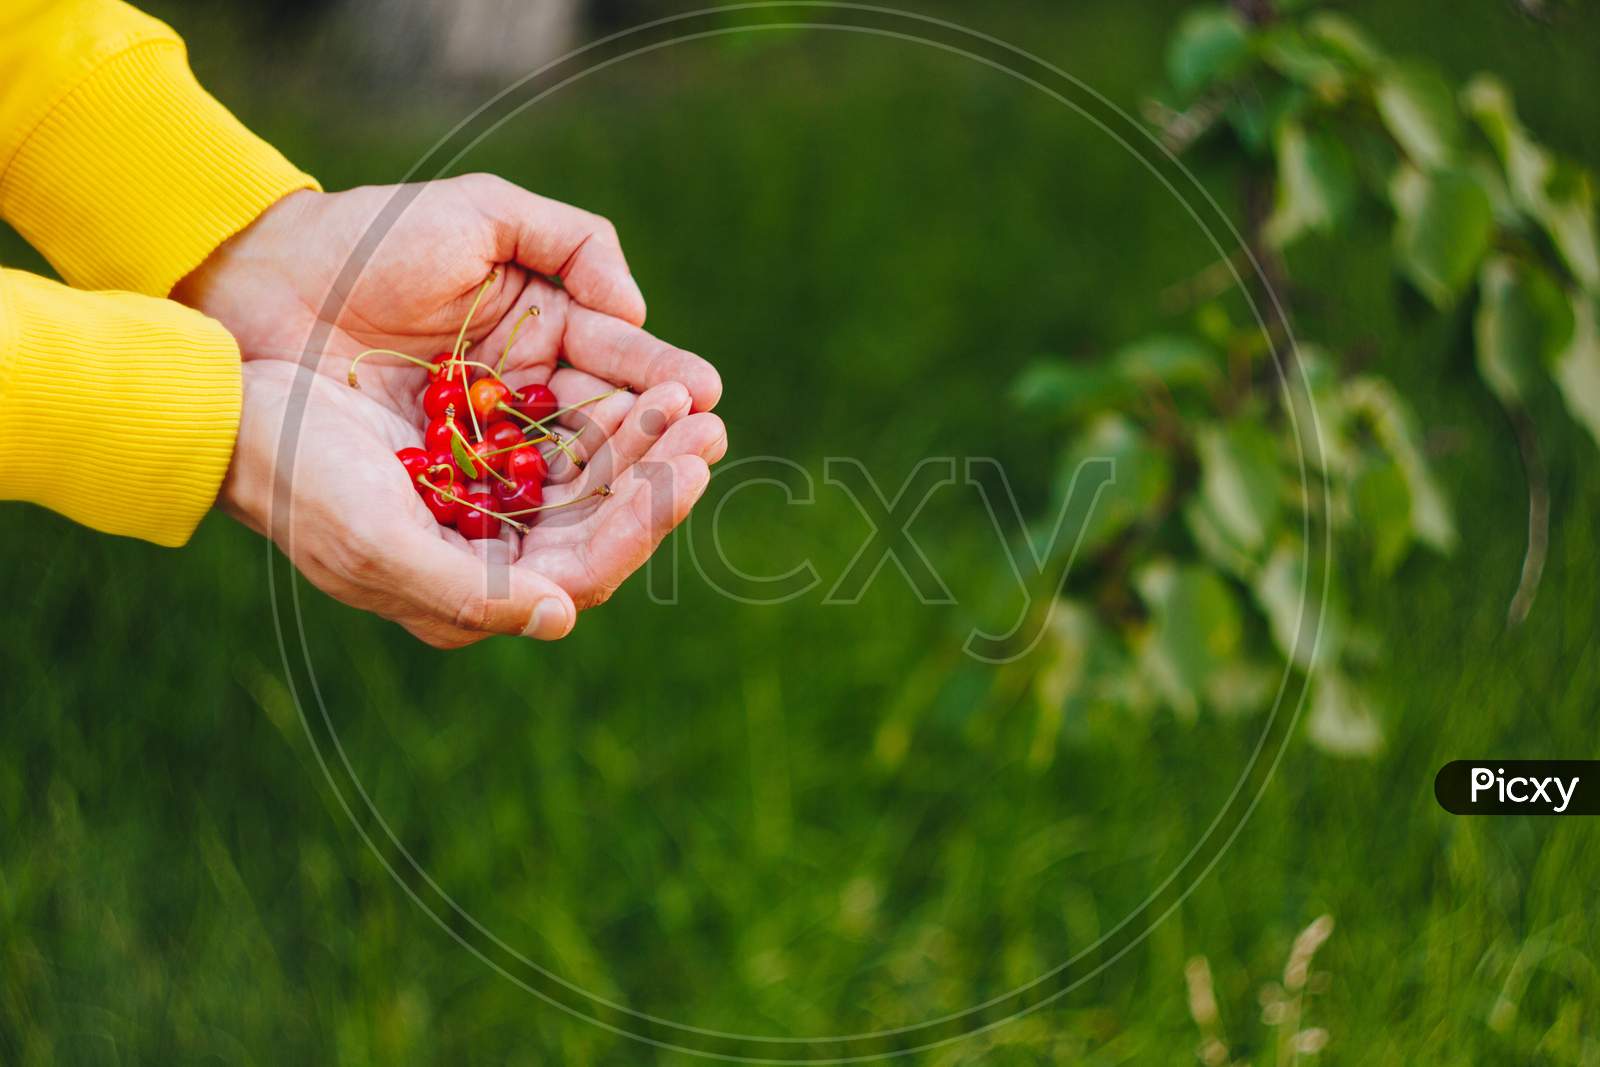 A Man'S Hand Is Holding A Freshly Picked Ripe Fruit Of A Red Sweet Cherry With Sprigs And A Vinelet On A Background Of Grass. Close-Up. Summer. On Blurred Background.